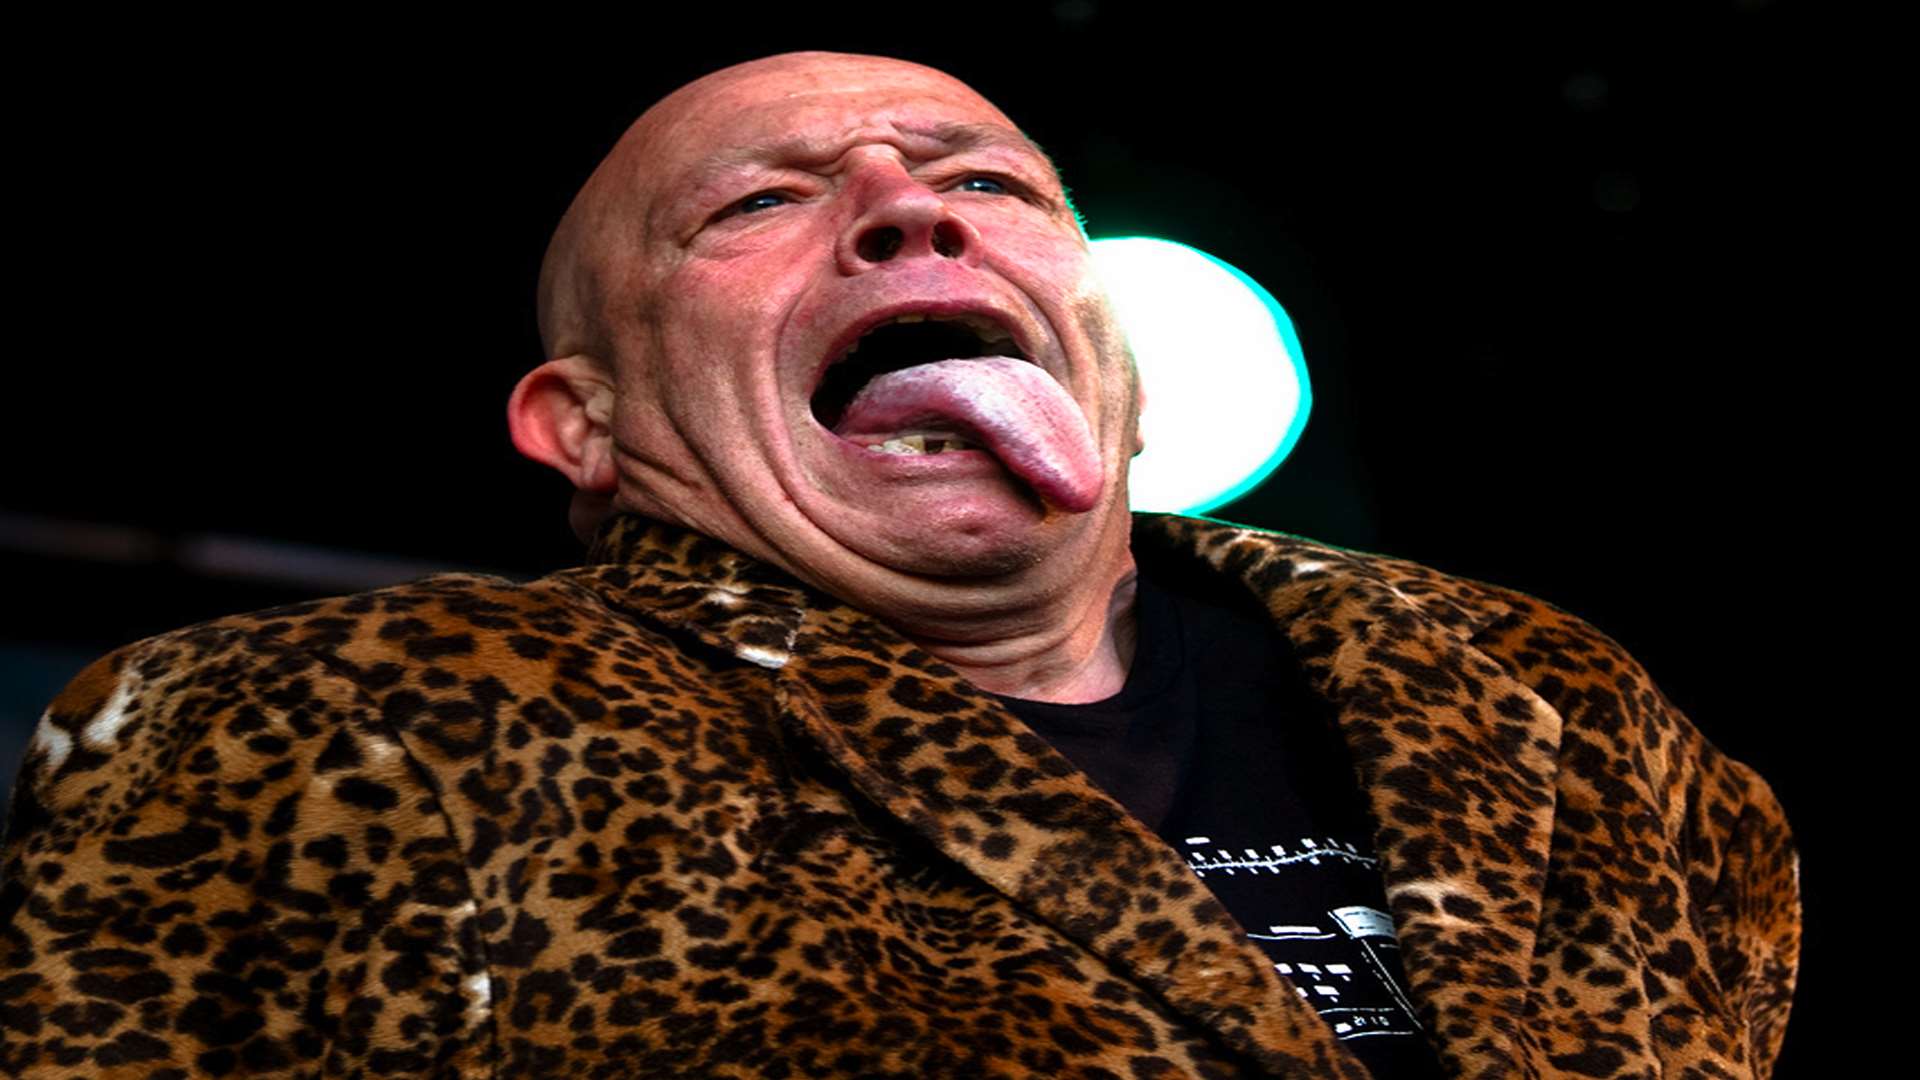 The instantly recogniseable Buster Bloodvessel who is coming to Dartford with Bad Manners